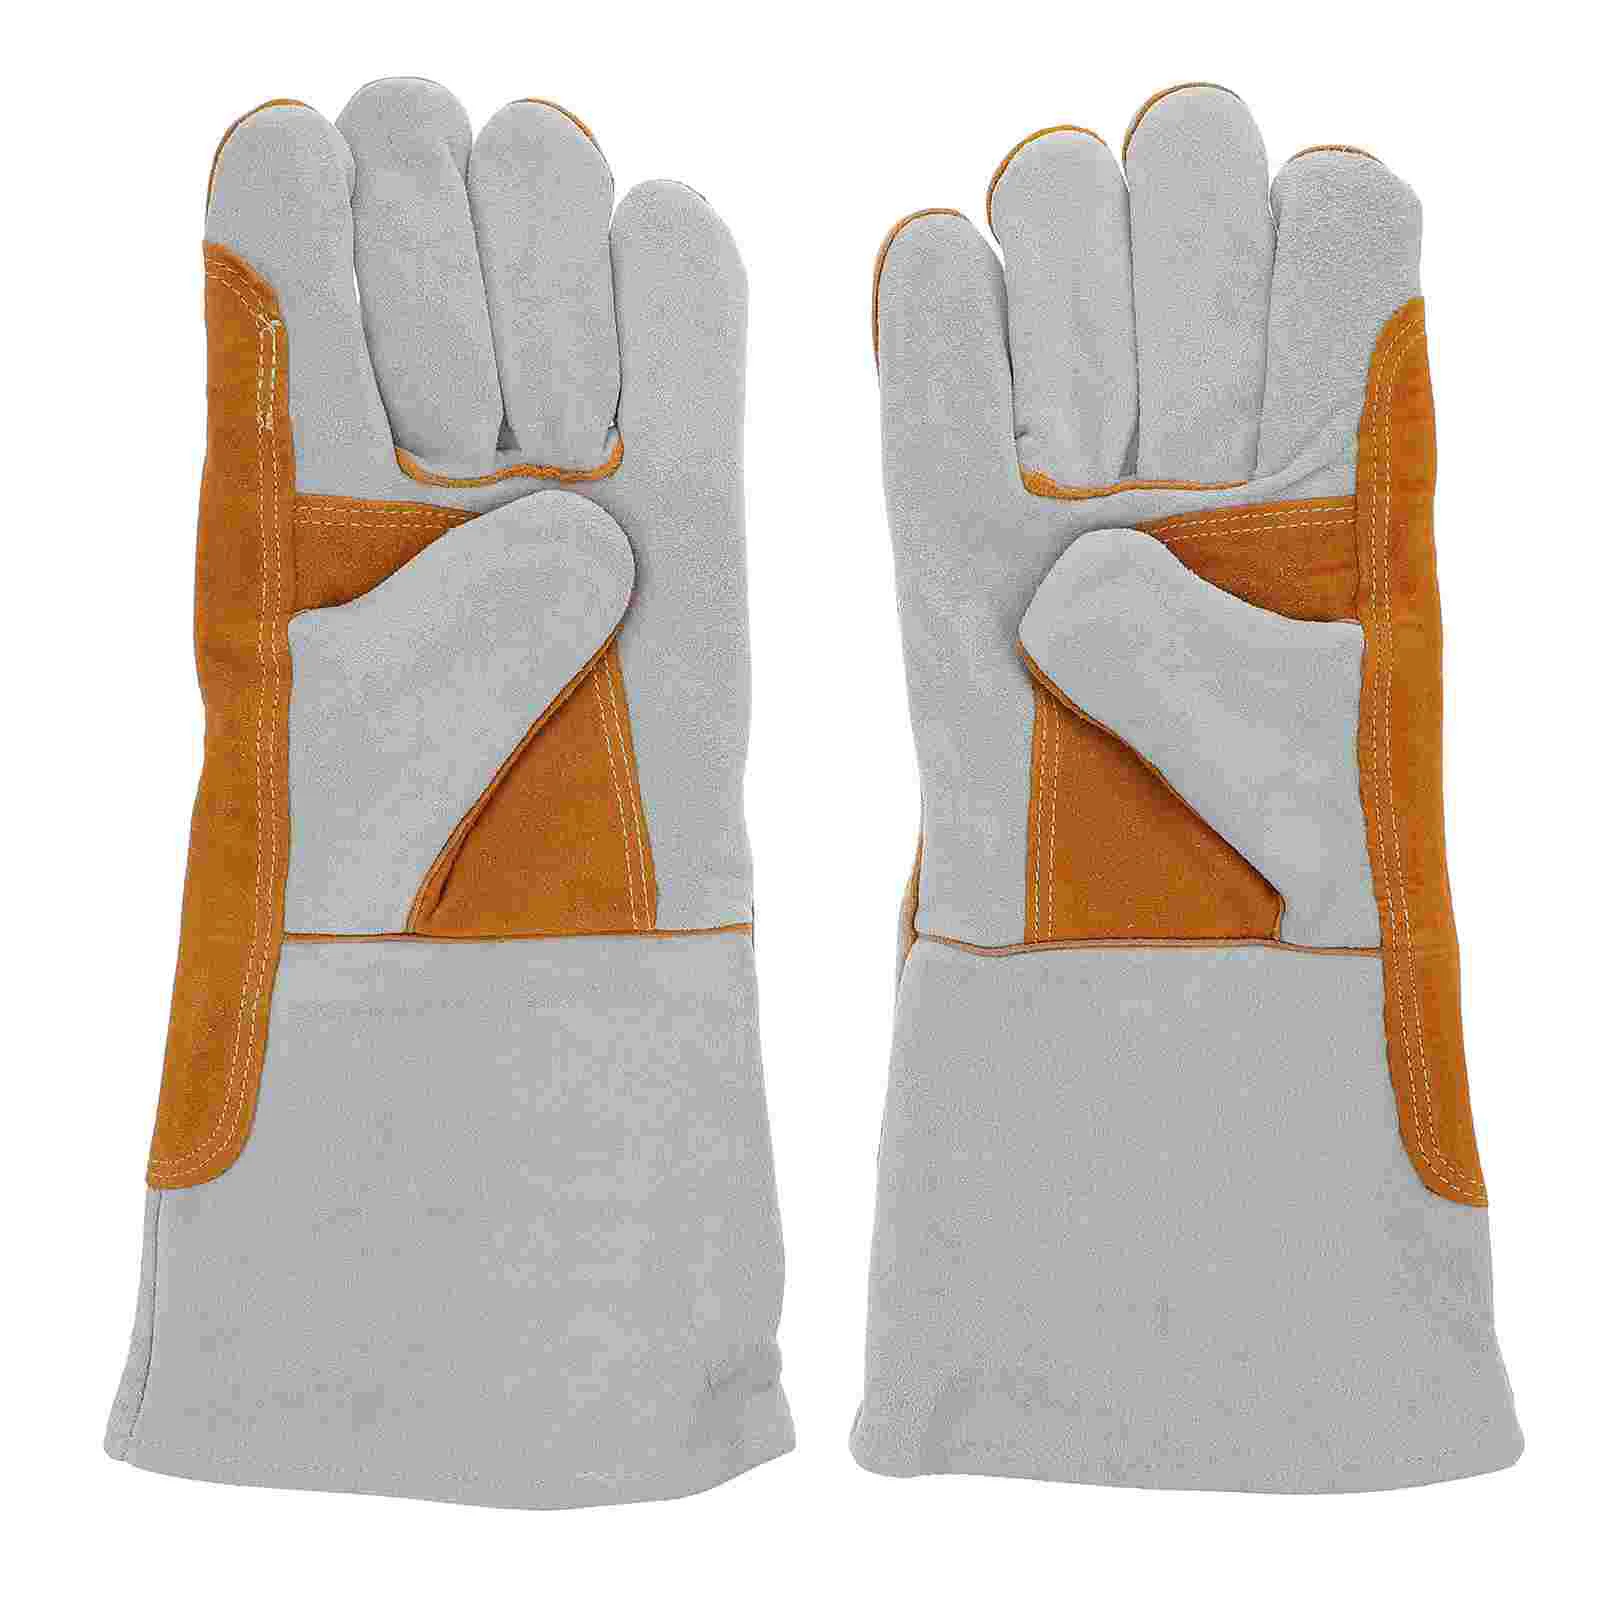 

Gloves Work Welding Mitts Fireplace Cowhide High Temperature Resistance Heat Resistant For men Firefighters accessories